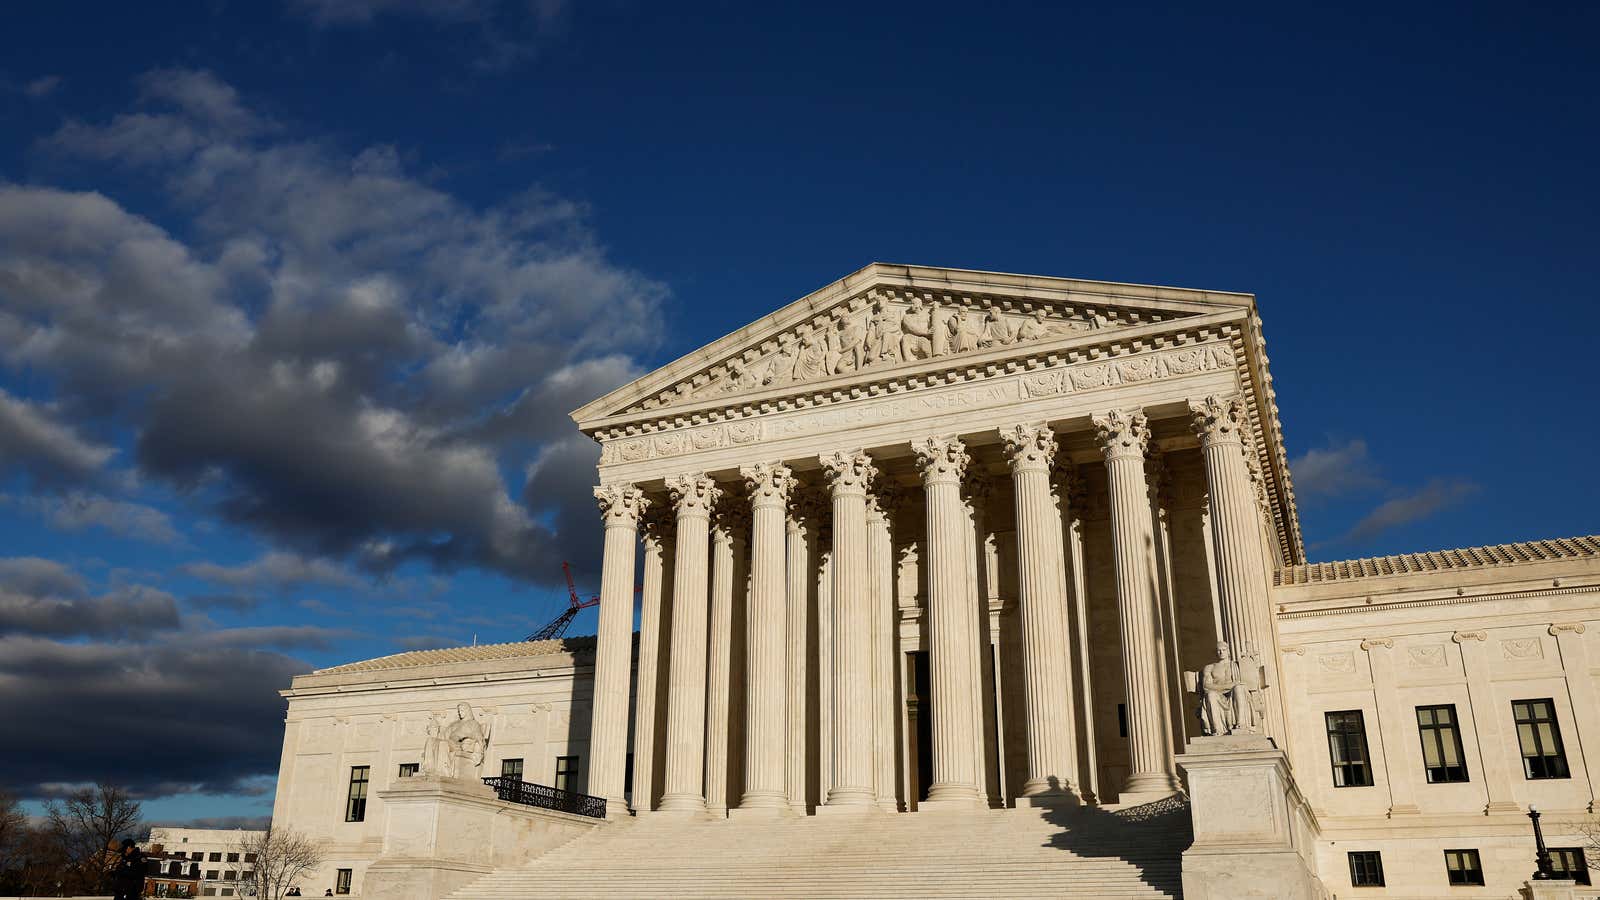 Social media laws in Texas and Florida hang in limbo as Supreme Court delays decision